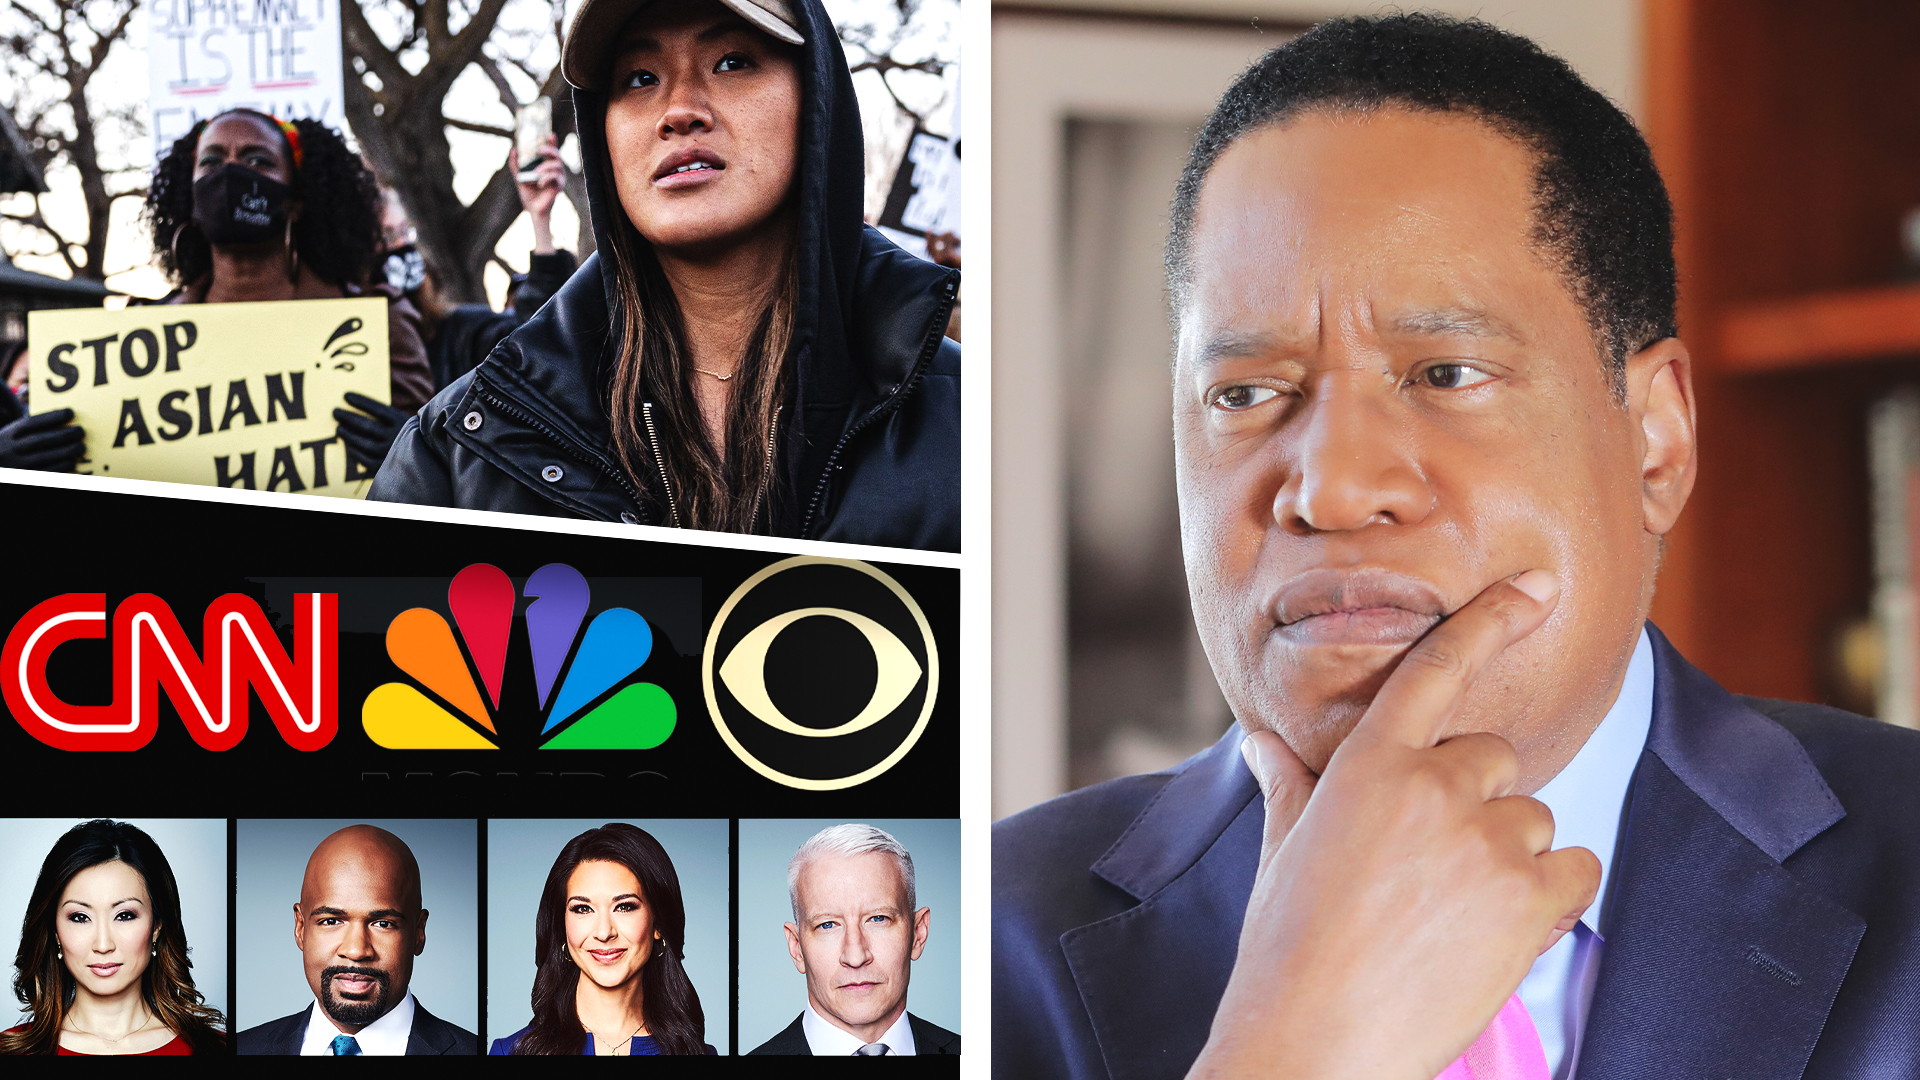 What the Media Doesn’t Tell You About Asian American Hate Crimes - Larry Elder